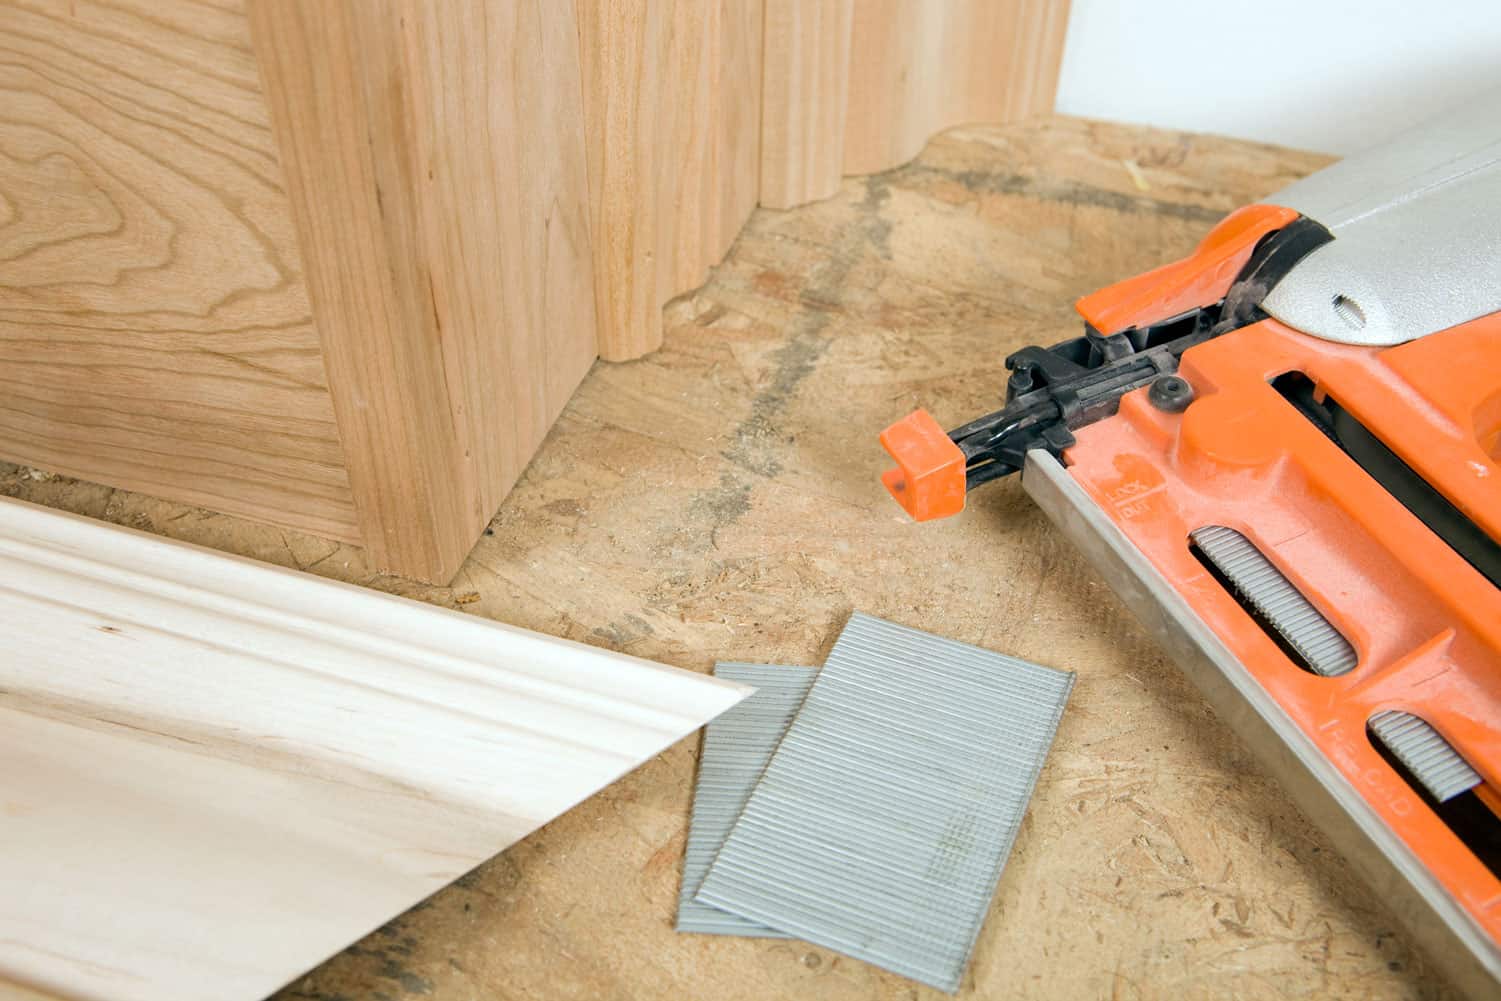 Can You Use A Brad Nailer For Baseboards? - uooz.com